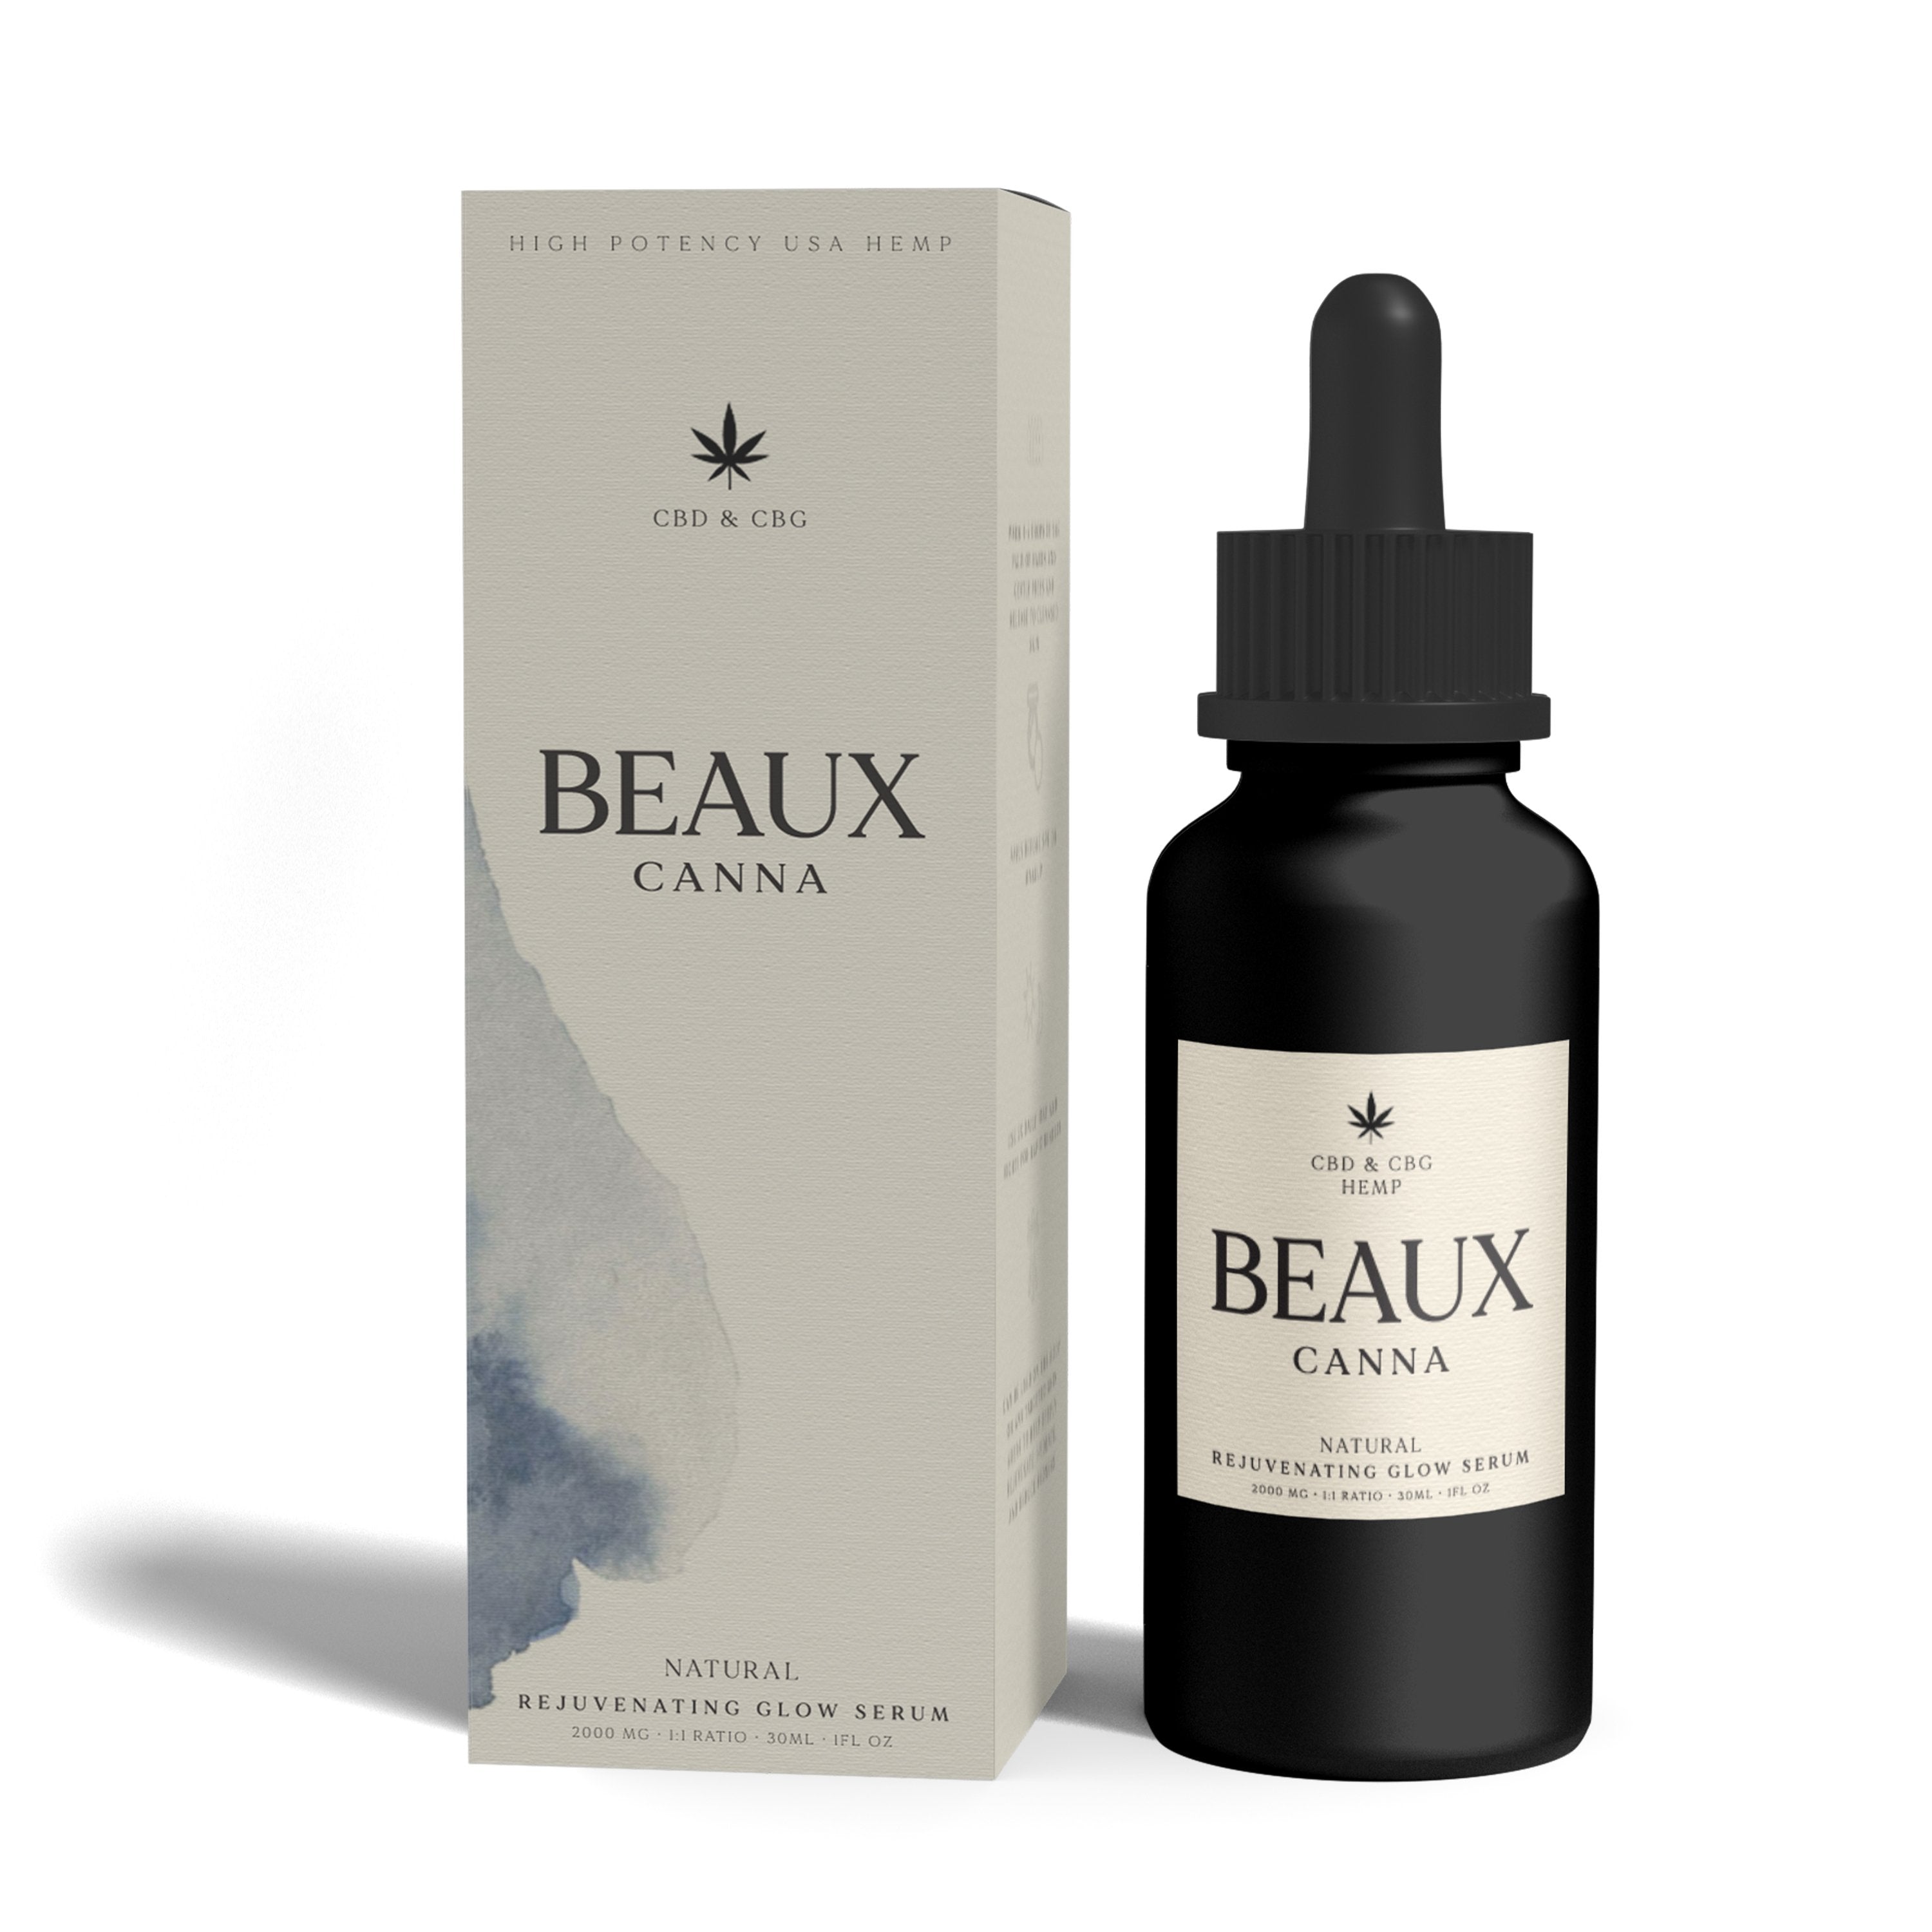 Beauxcanna Natural Rejuvenating Glow Serum opaque 1oz bottle and box made from high potency USA hemp and featuring 1000mg CBG and 1000mg CBD. Used for pain, hydration, arthritis, anxiety, and more.